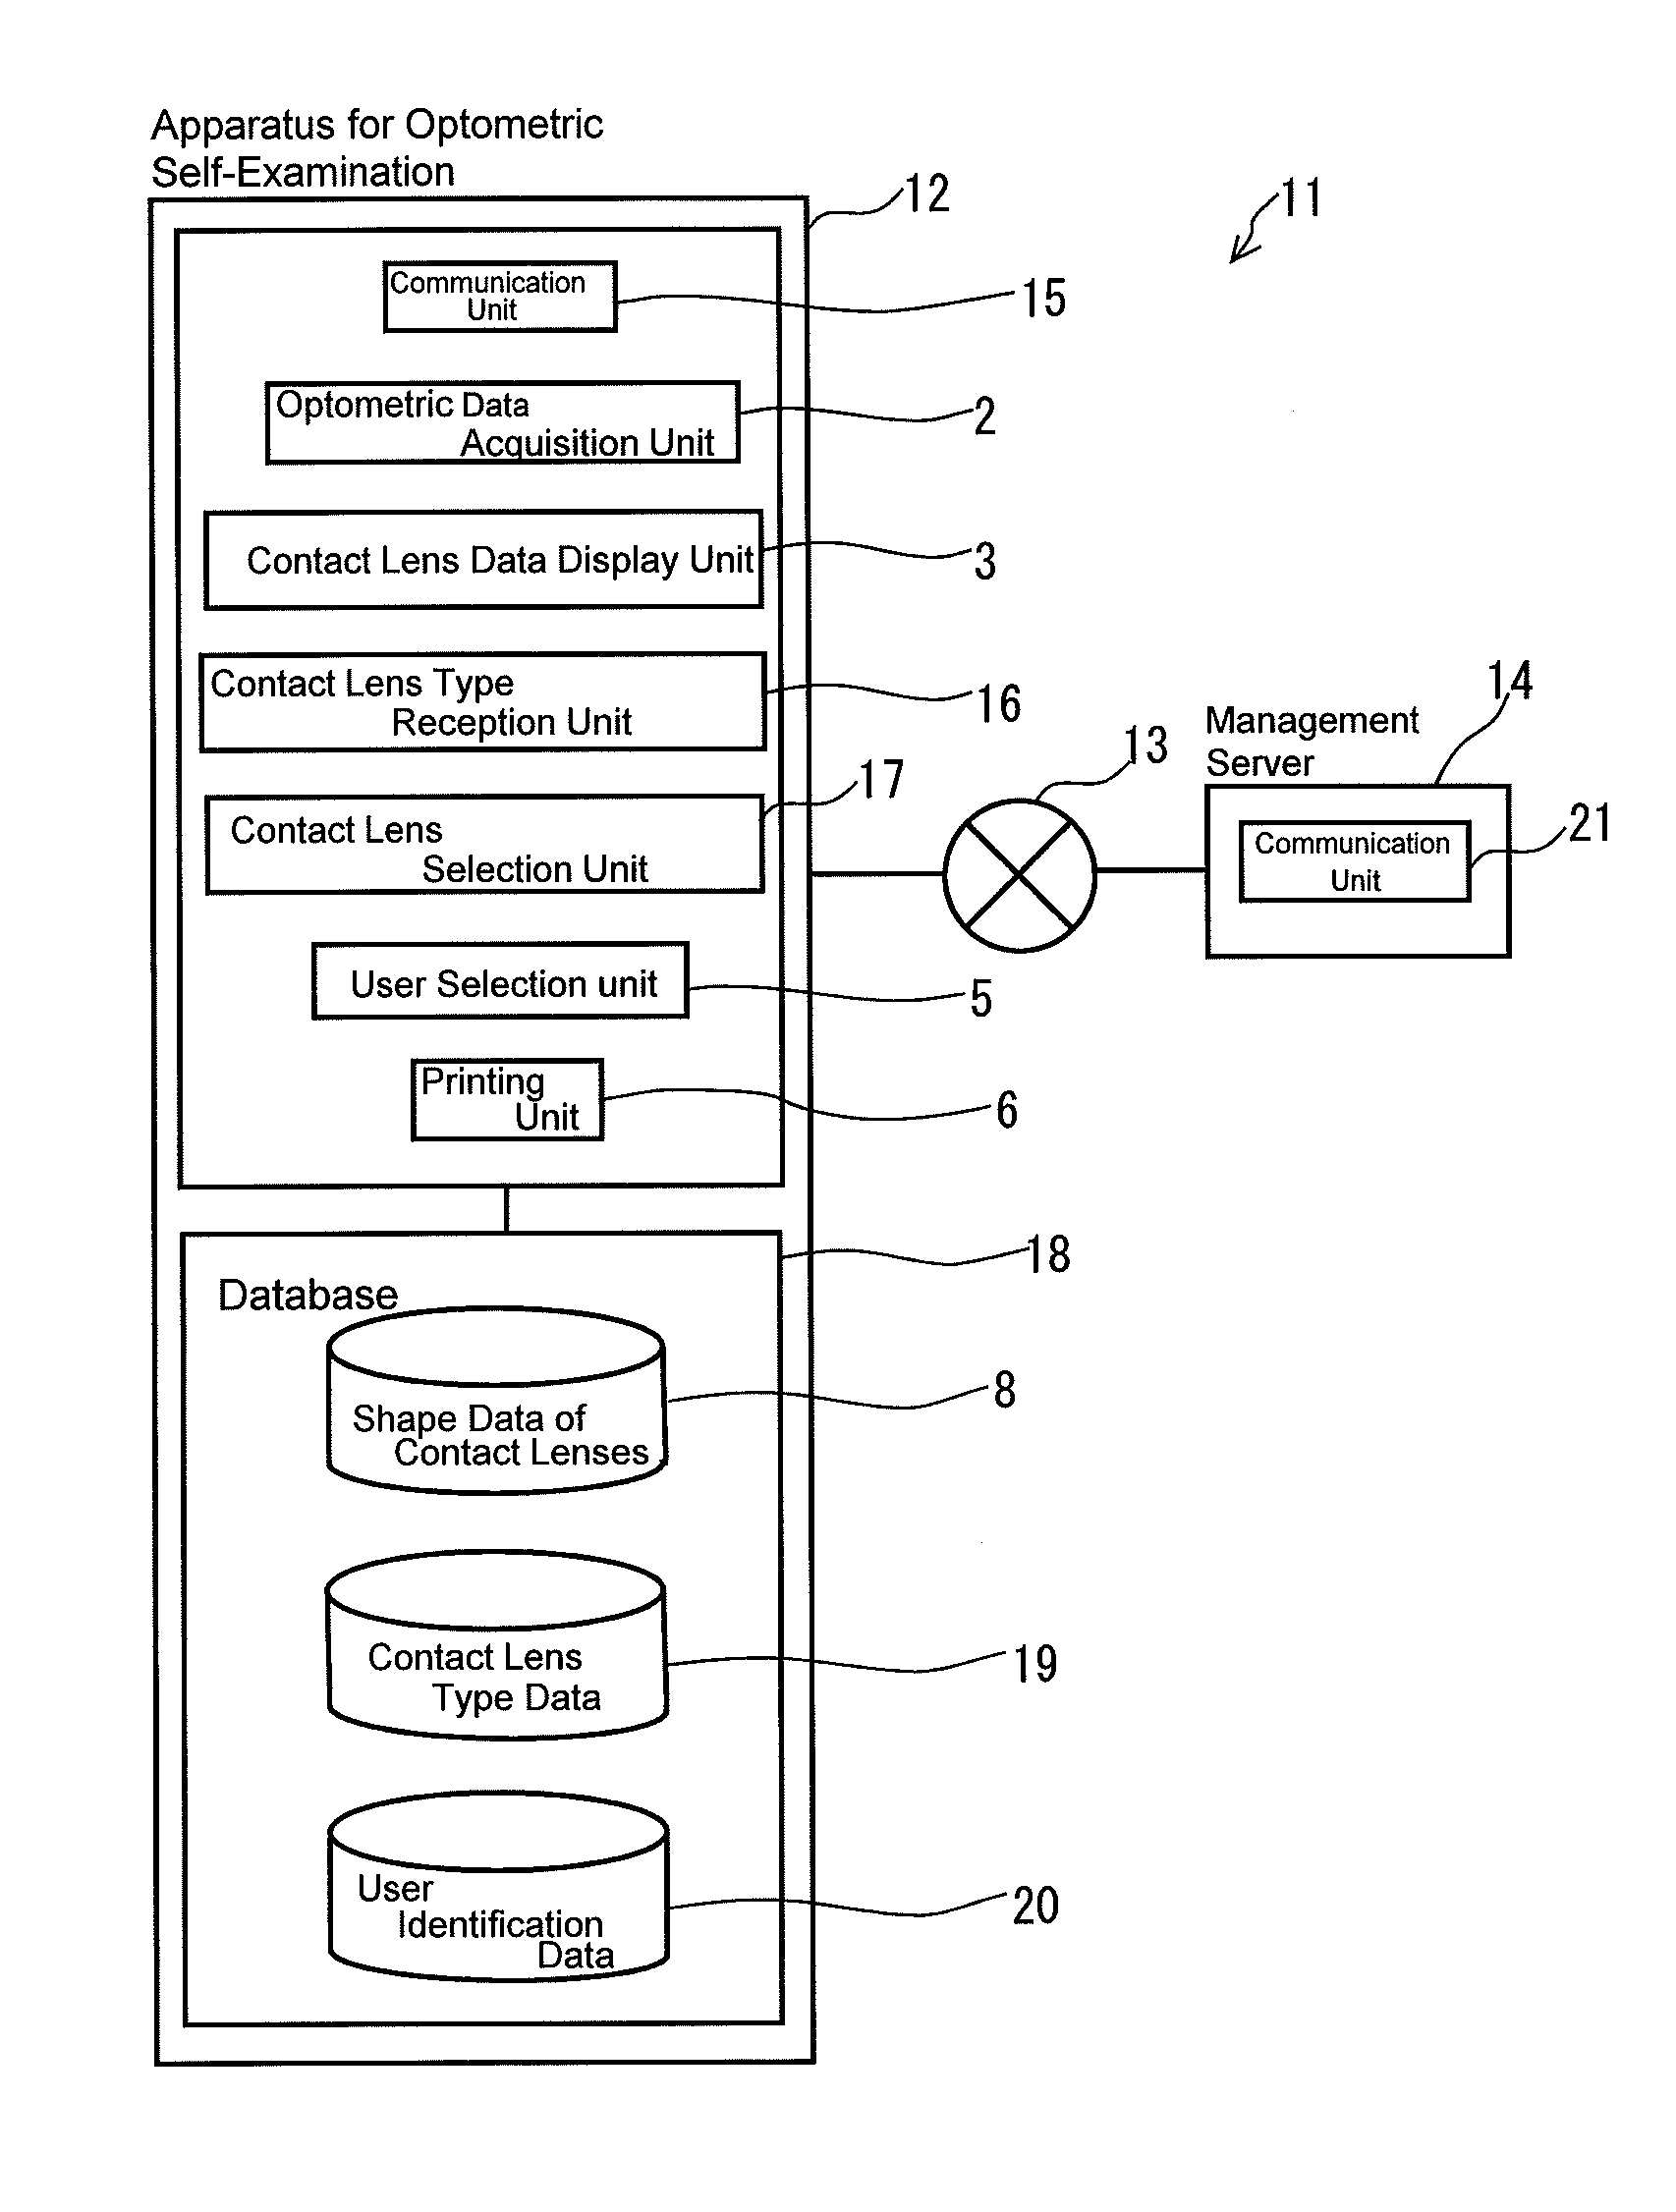 Apparatus for optometric self-examination, management server and contact lens selection system